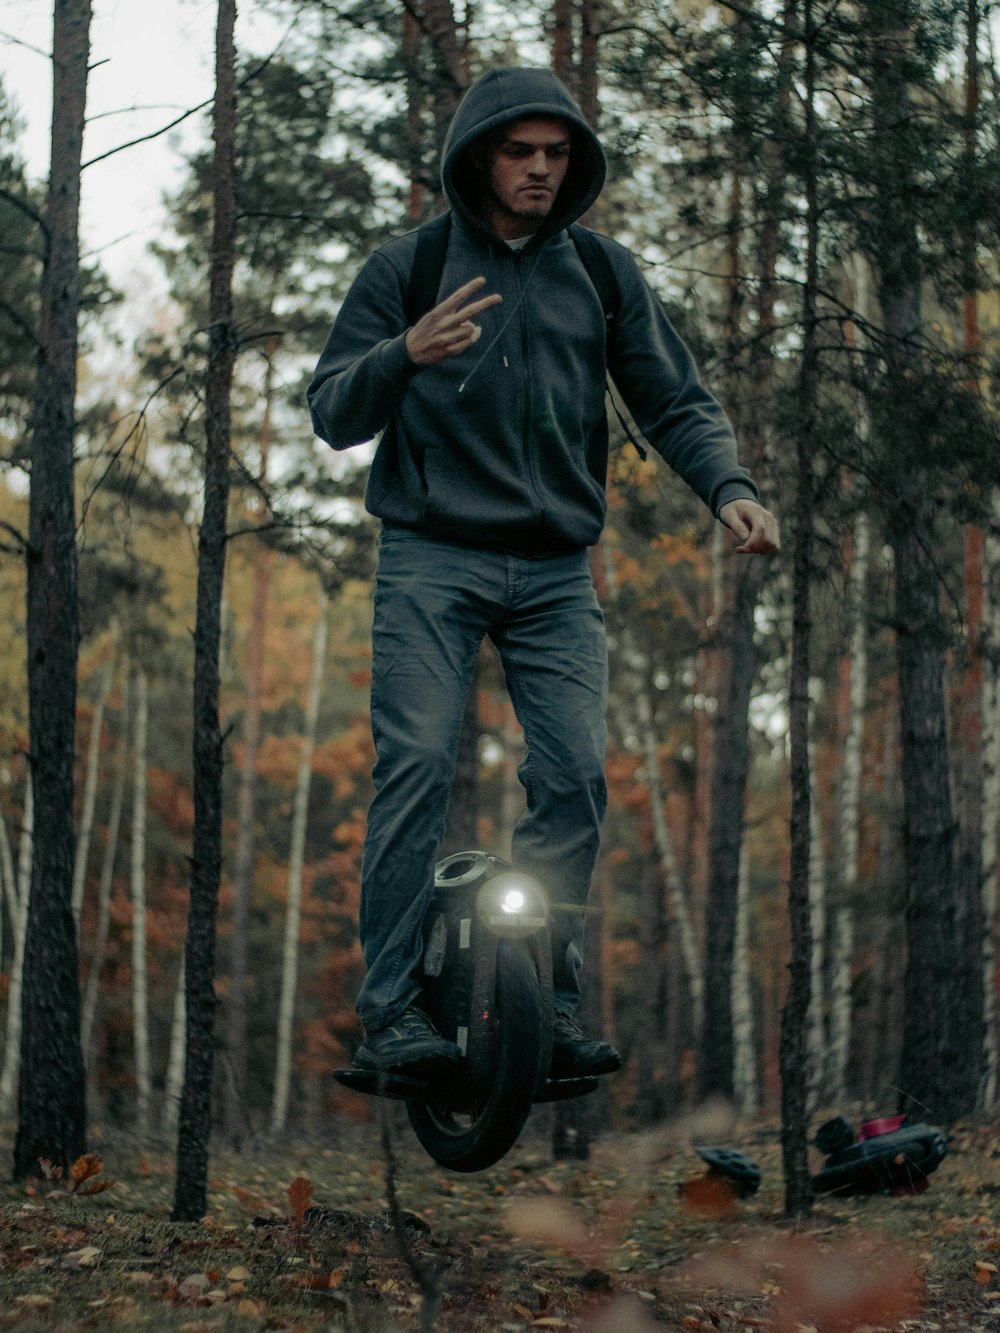 a man riding on the back of a motorcycle through a forest